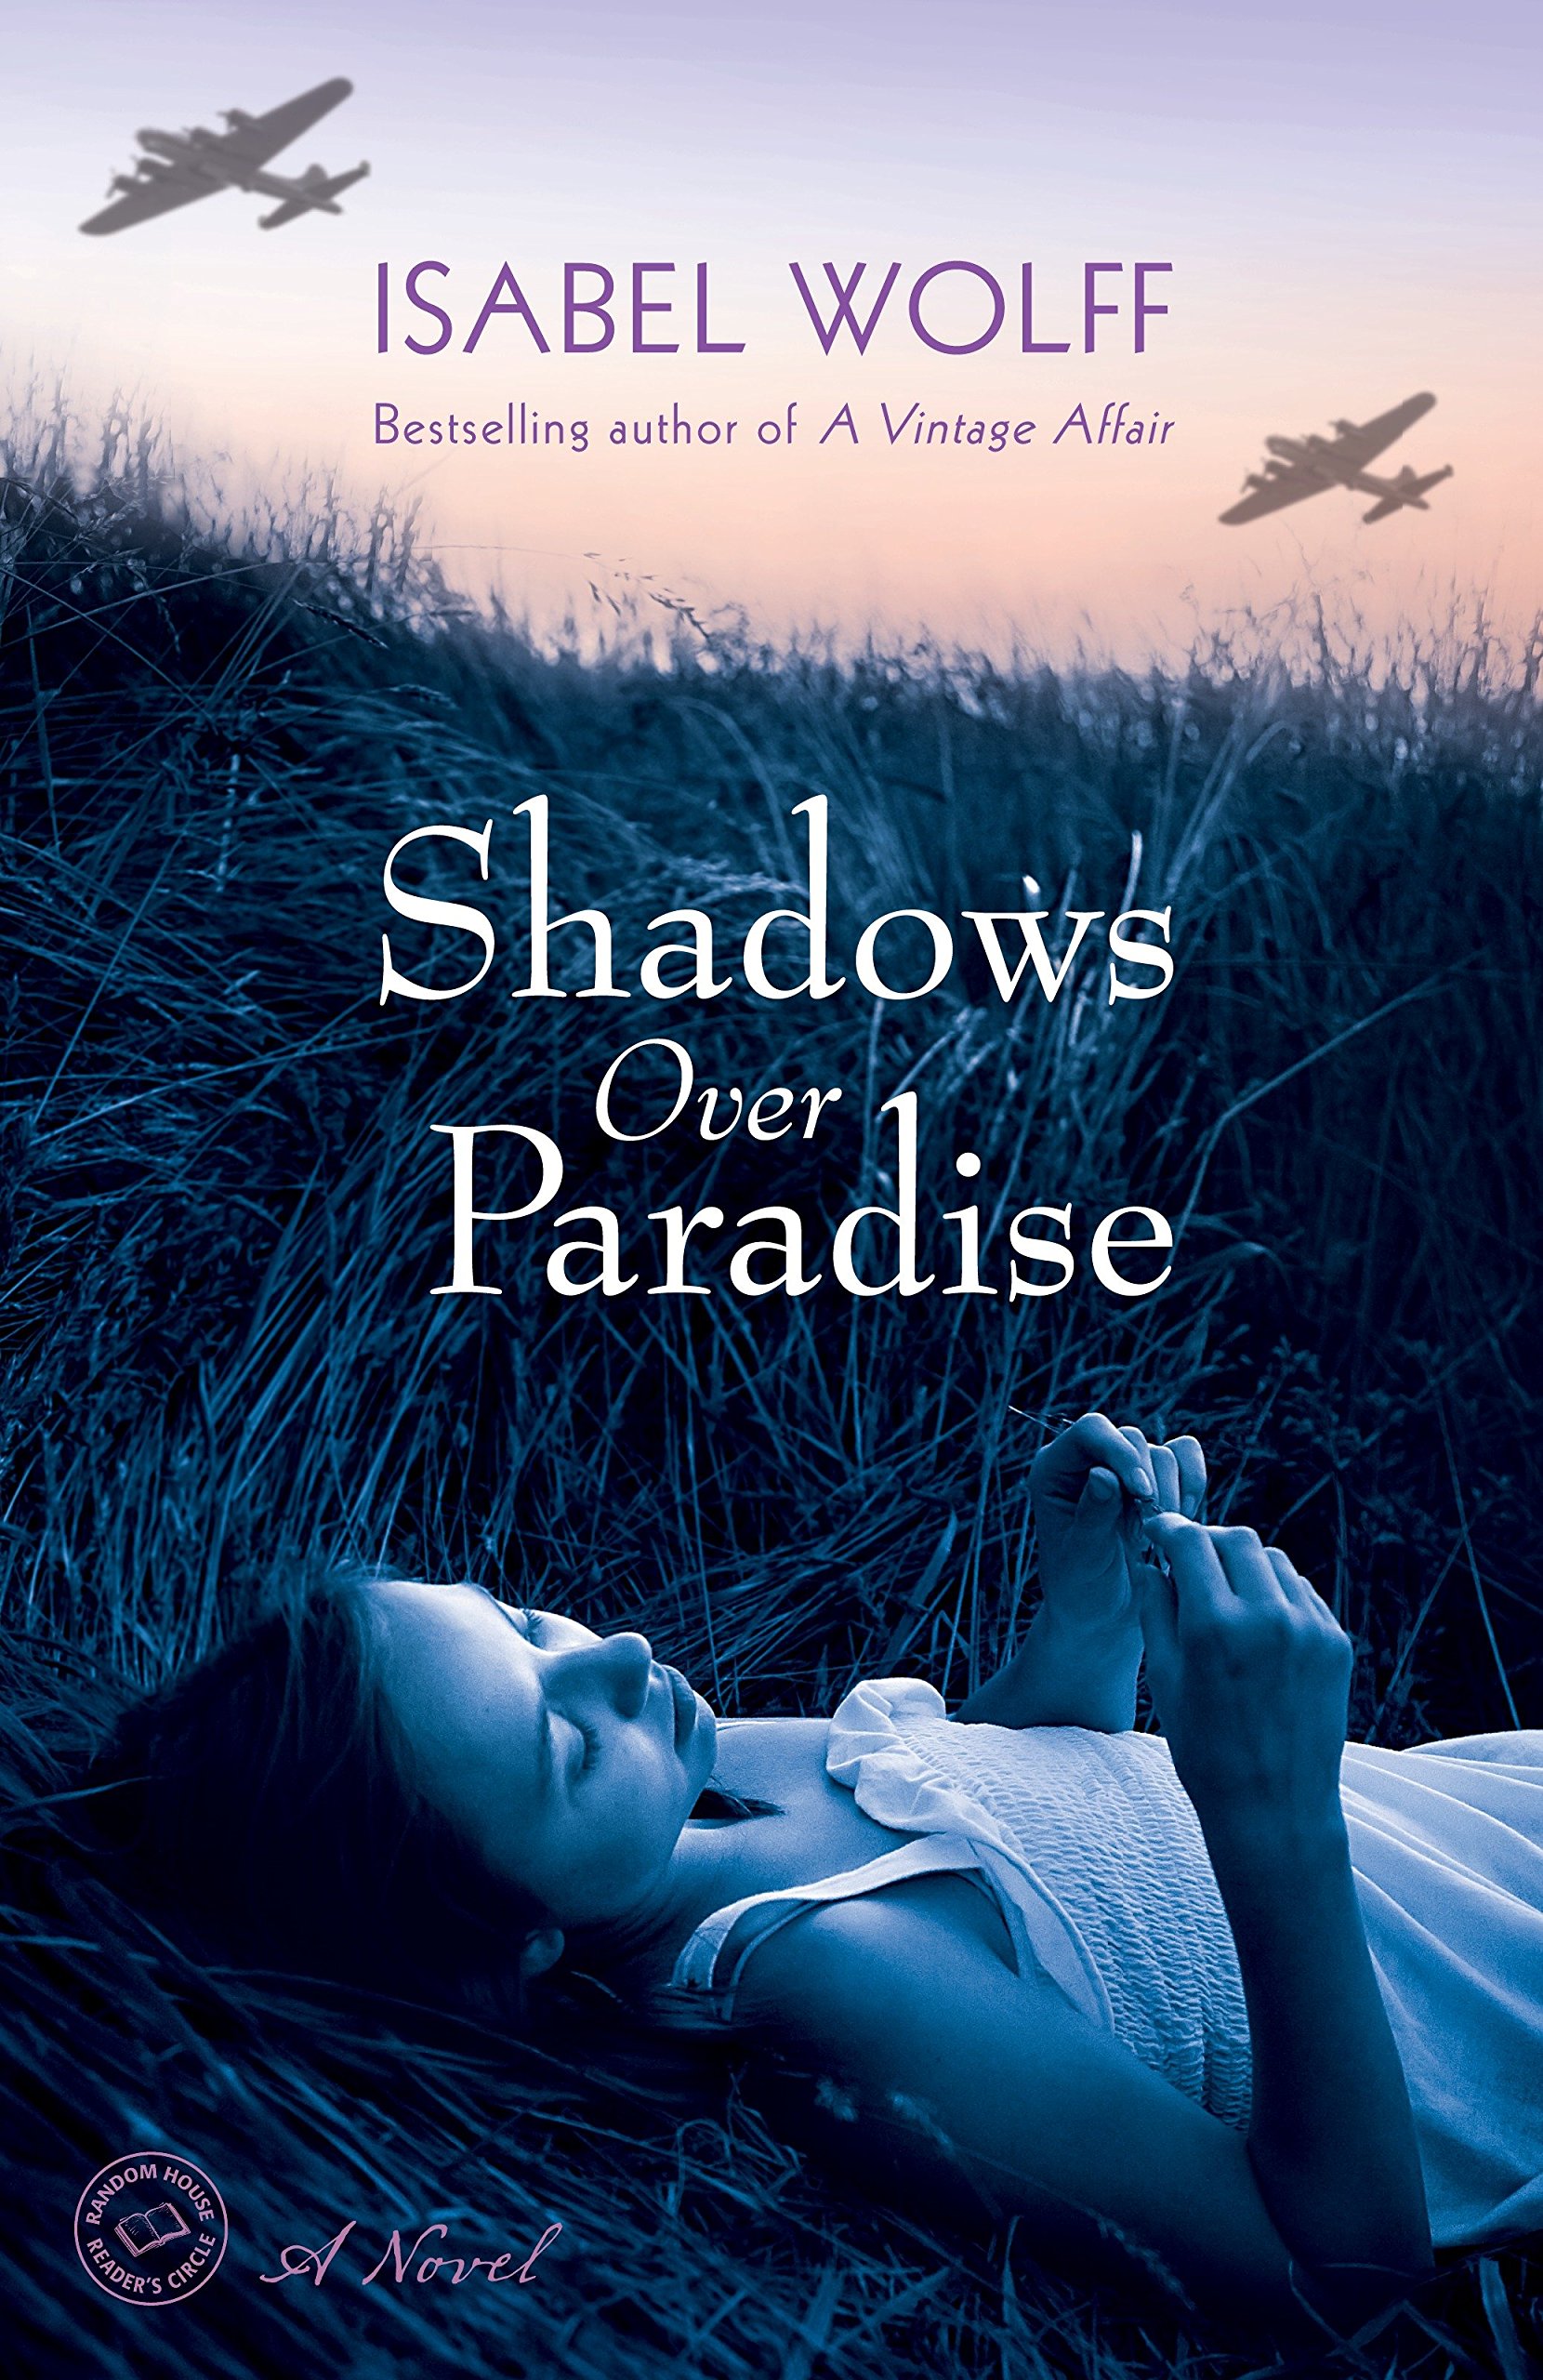 Image for "Shadows Over Paradise"